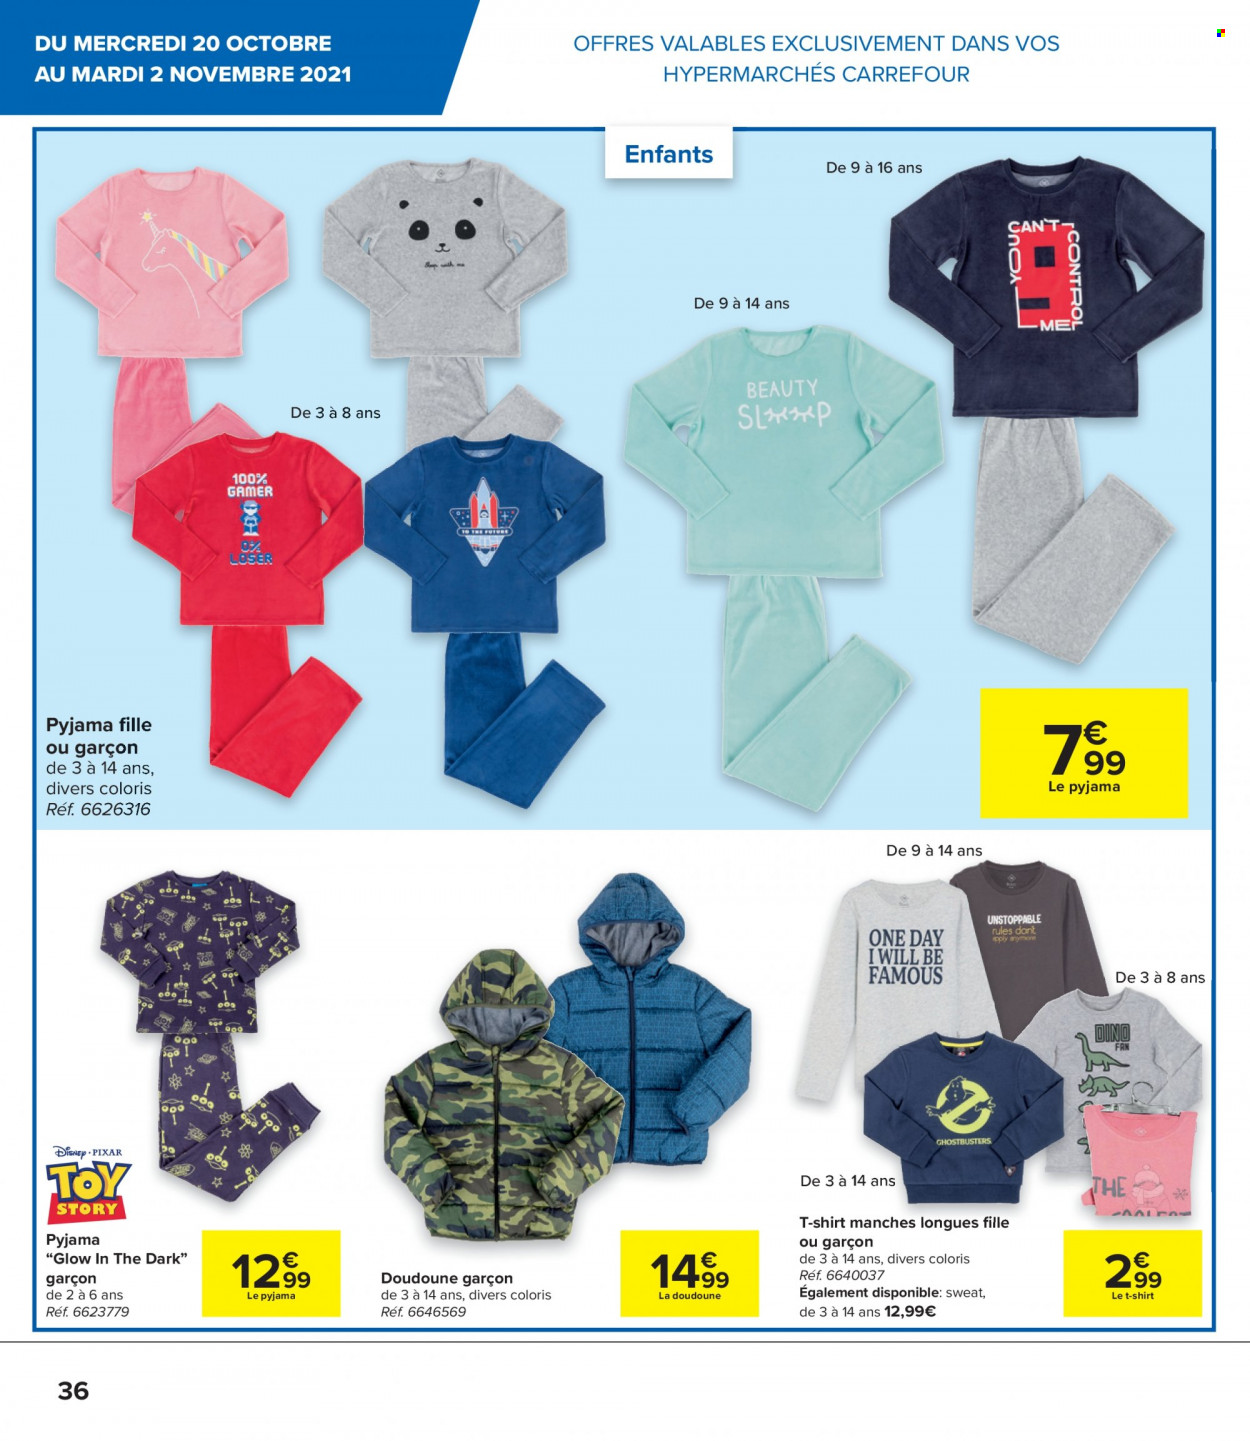 Catalogue Carrefour hypermarkt - 20.10.2021 - 2.11.2021. Page 12.